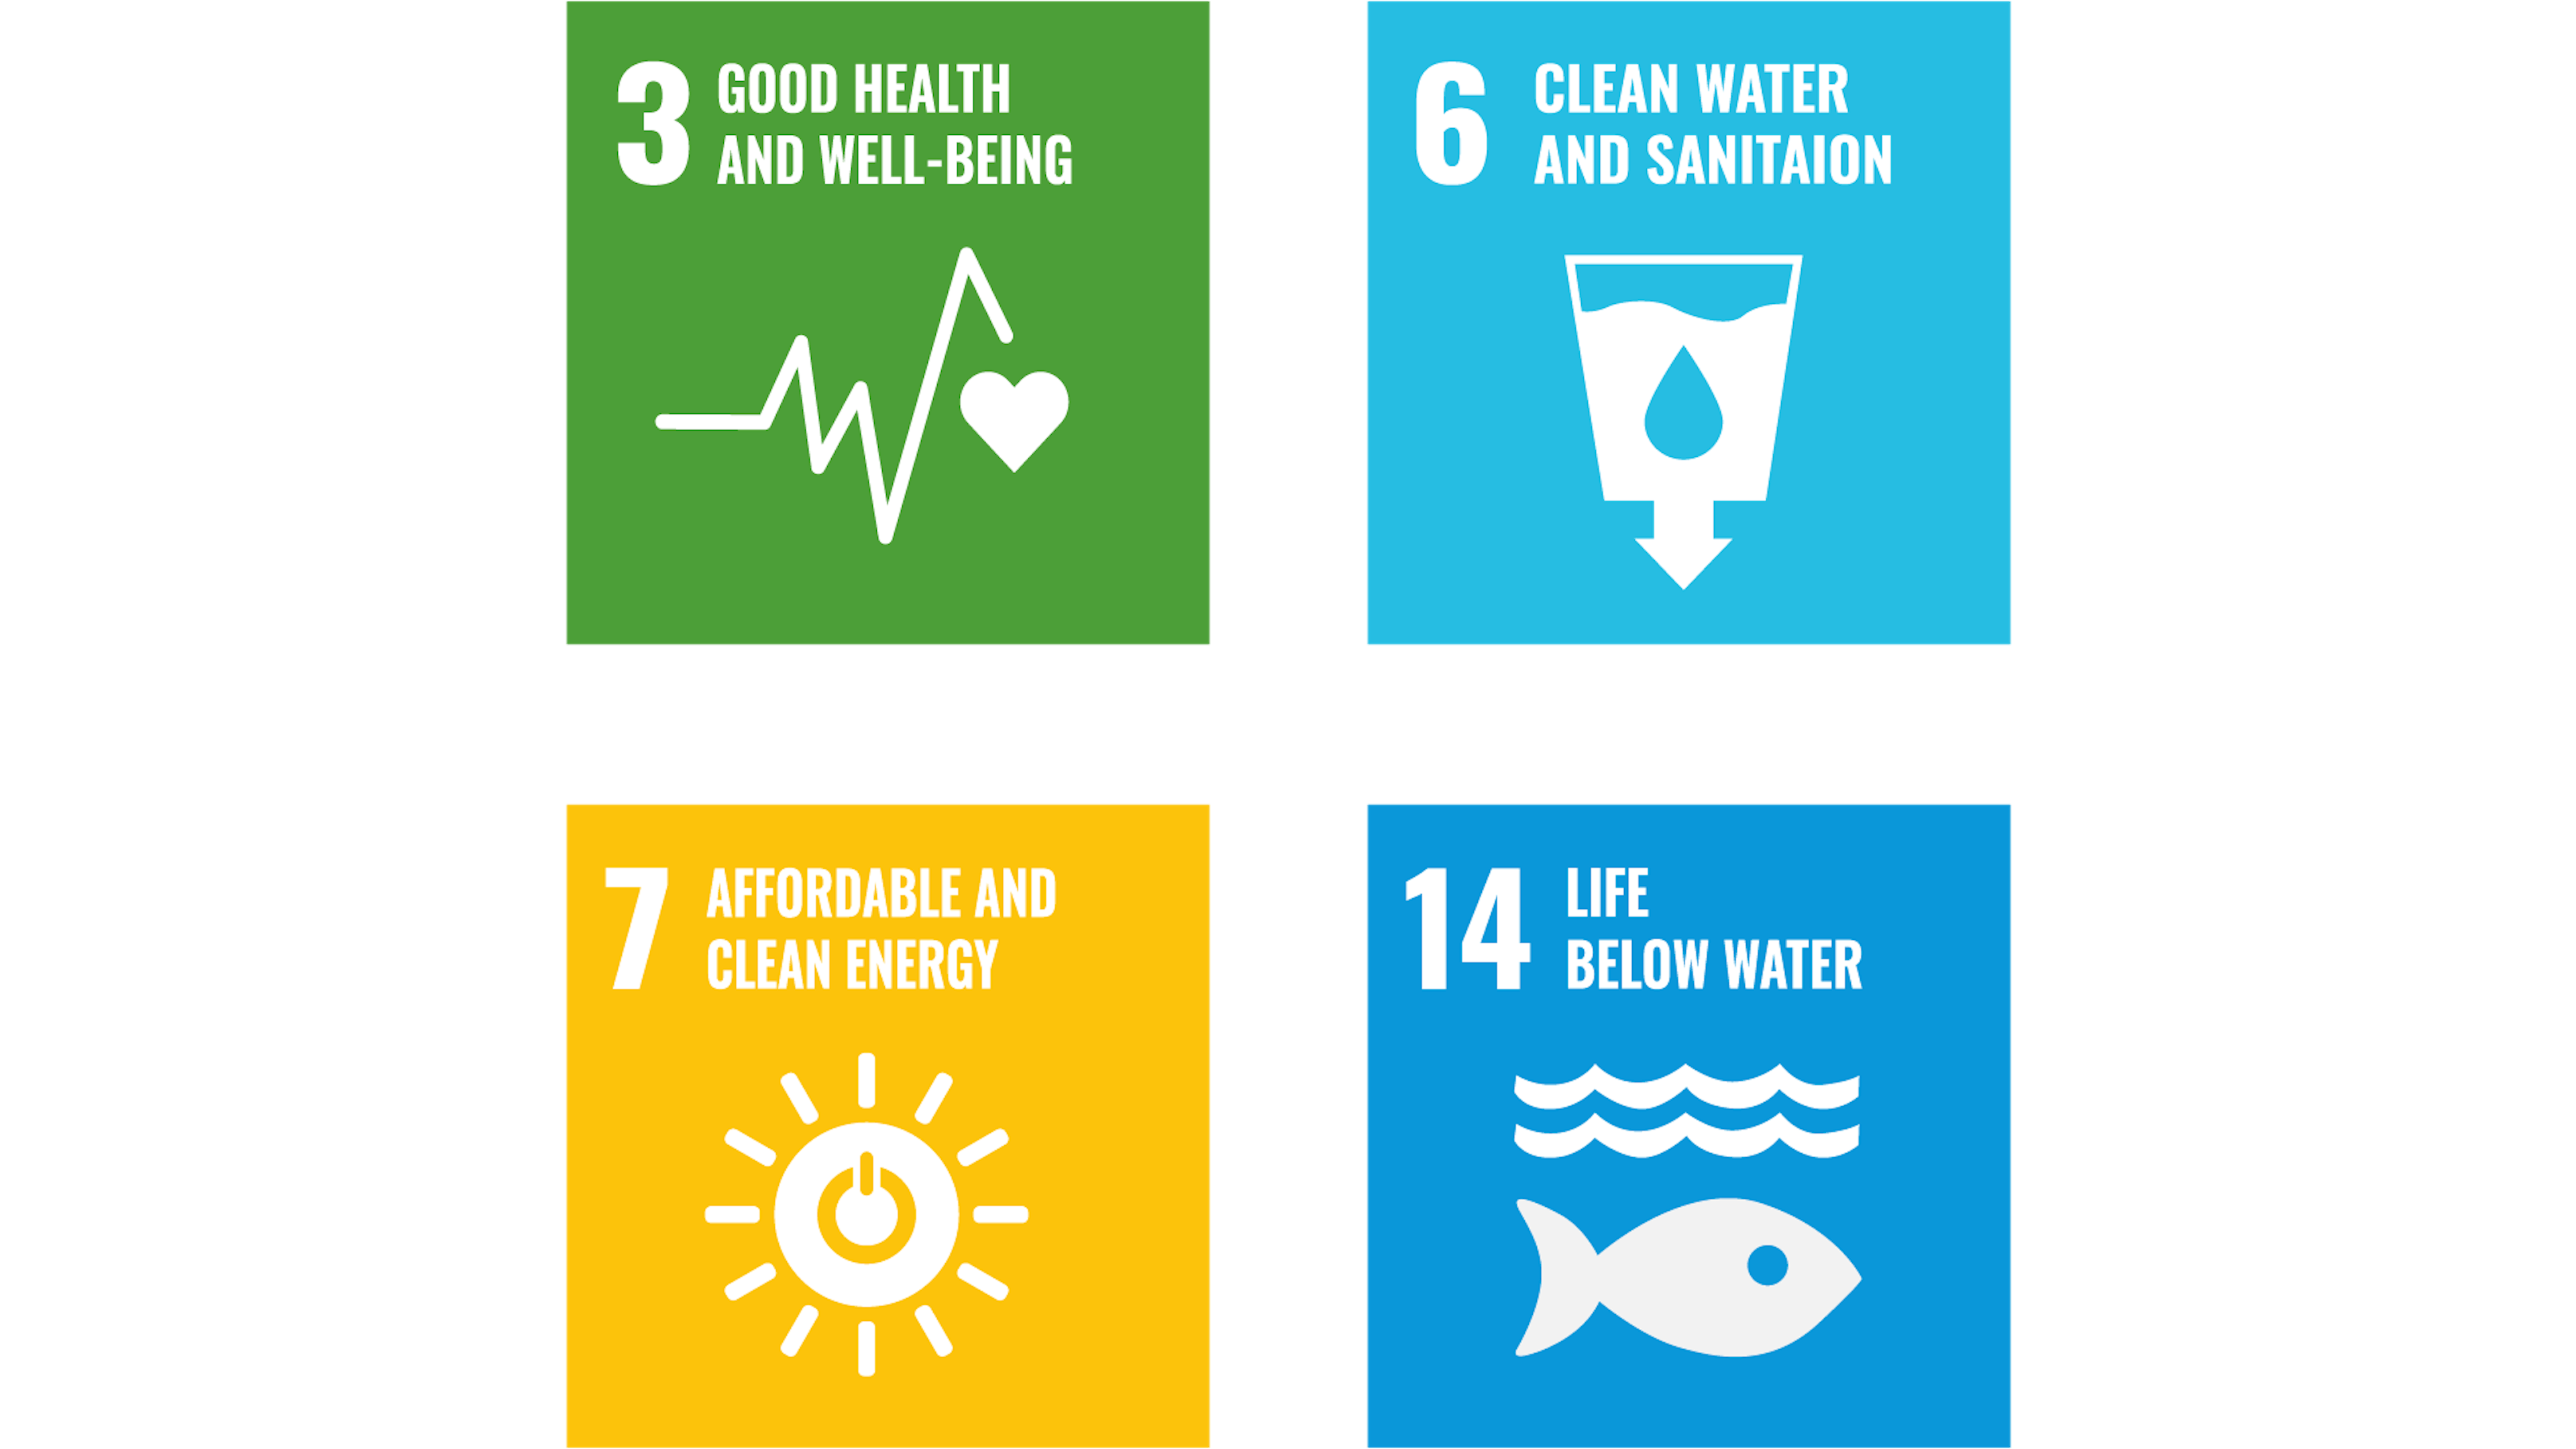 Sustainable Development Goals: A Roadmap for a Brighter Future.